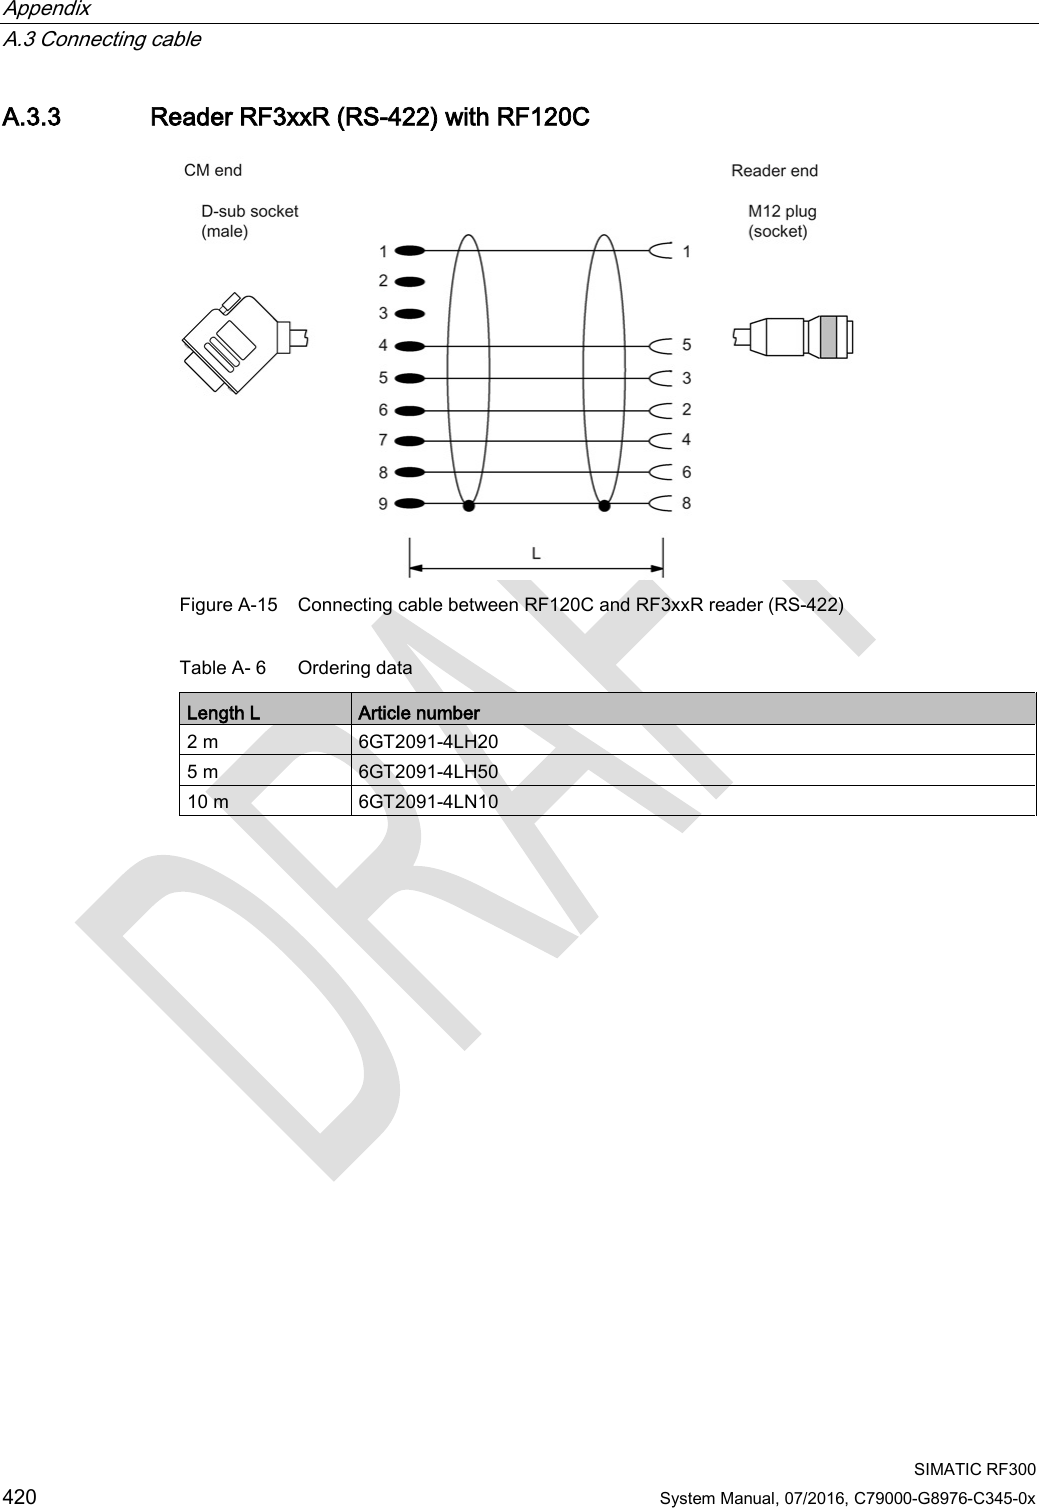 Appendix   A.3 Connecting cable  SIMATIC RF300 420 System Manual, 07/2016, C79000-G8976-C345-0x A.3.3 Reader RF3xxR (RS-422) with RF120C  Figure A-15 Connecting cable between RF120C and RF3xxR reader (RS-422) Table A- 6  Ordering data Length L Article number 2 m 6GT2091-4LH20  5 m 6GT2091-4LH50  10 m 6GT2091-4LN10    